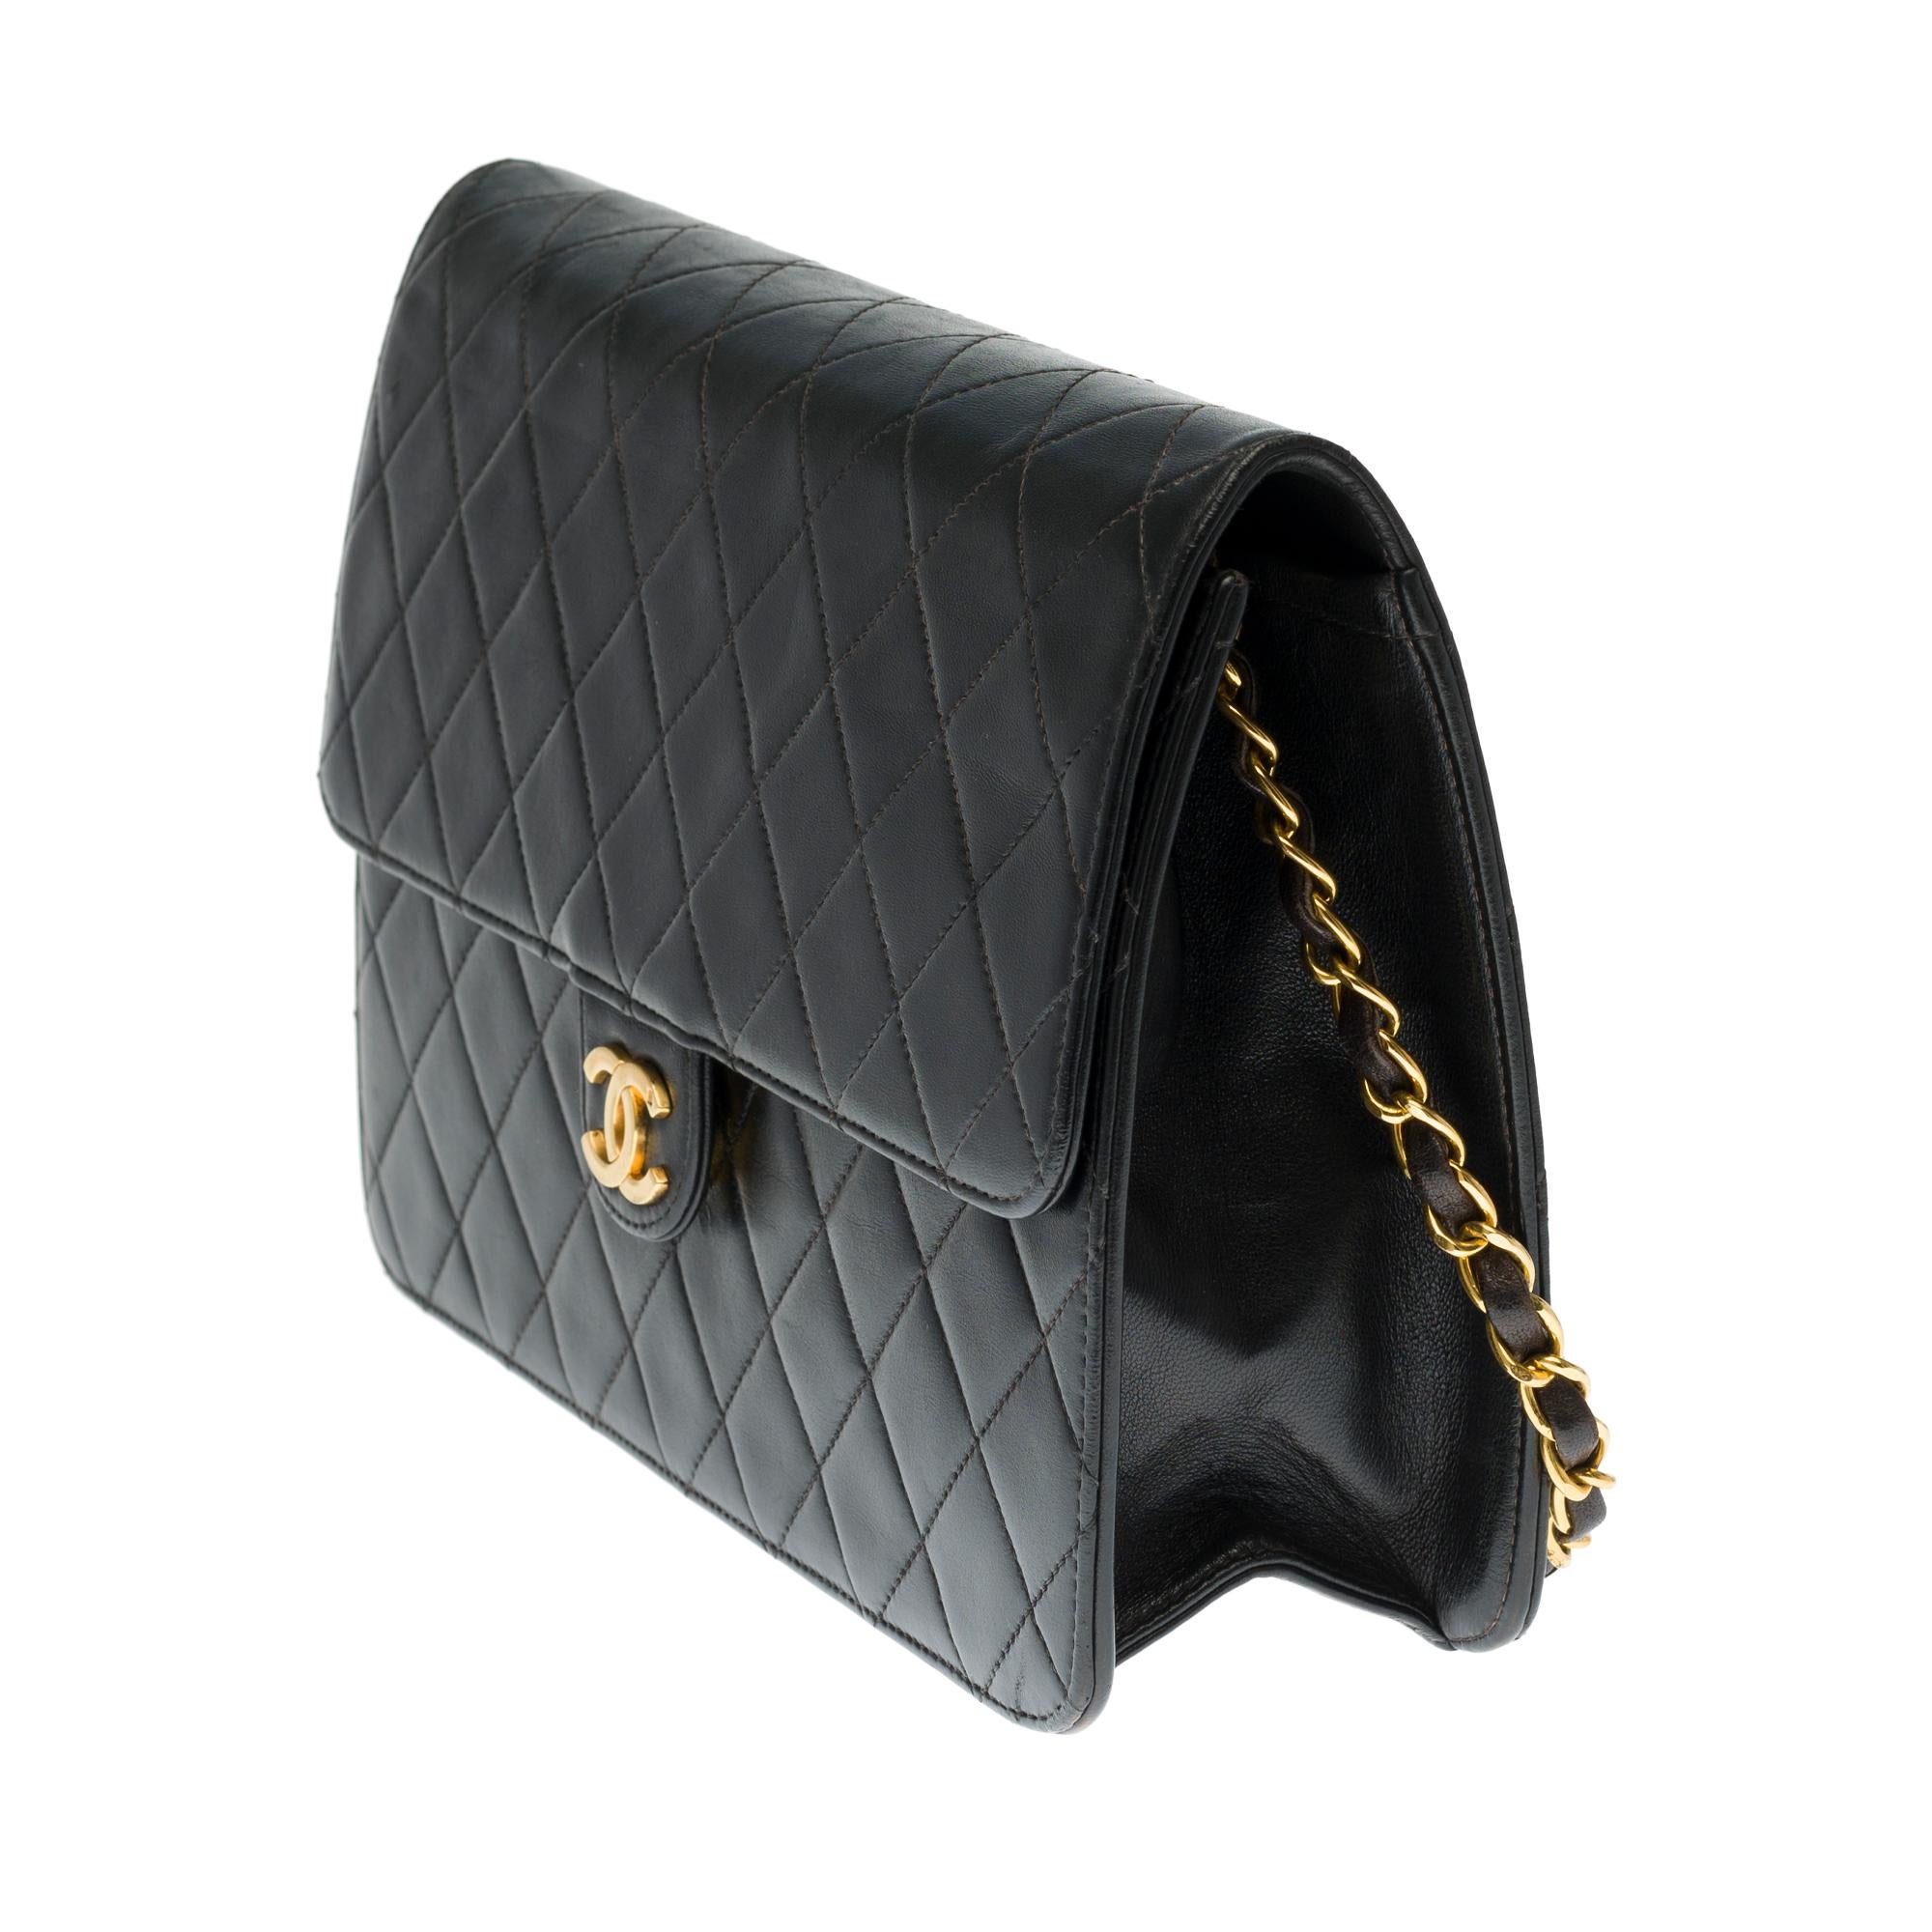 Black Chanel Classic 25cm shoulder bag in black quilted lambskin and gold hardware